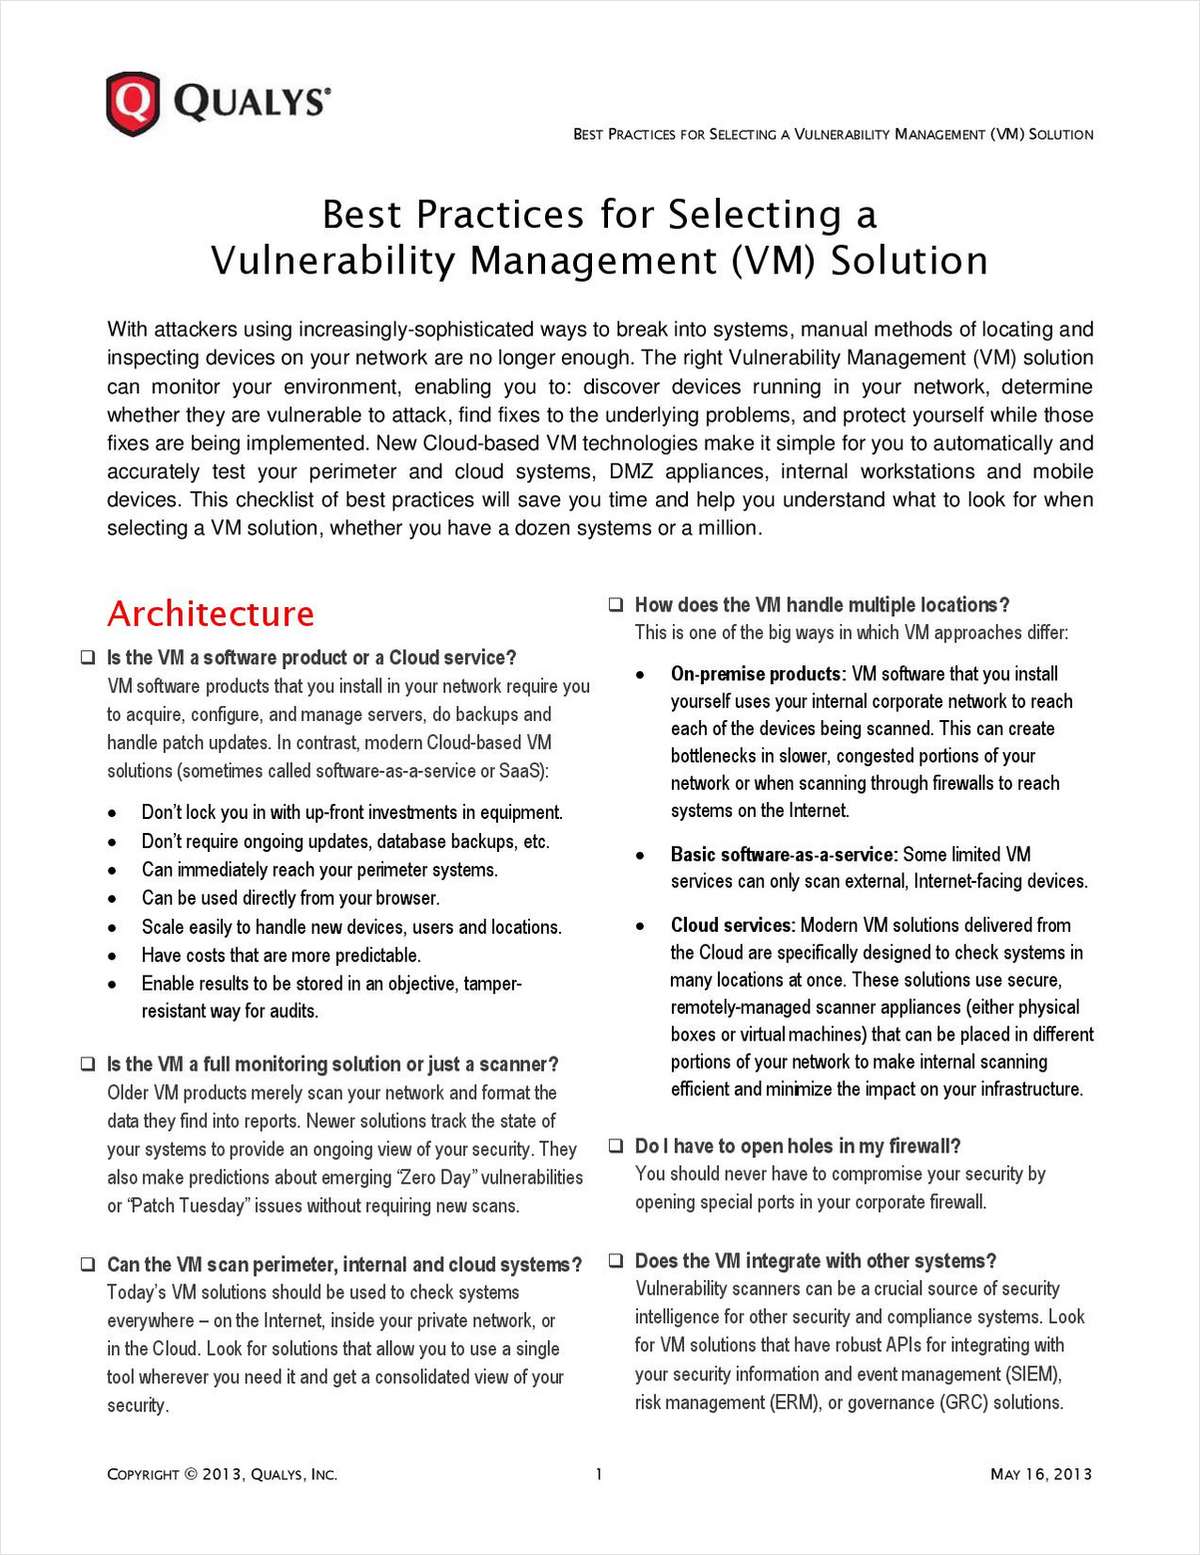 Best Practices for Selecting a Vulnerability Management (VM) Solution